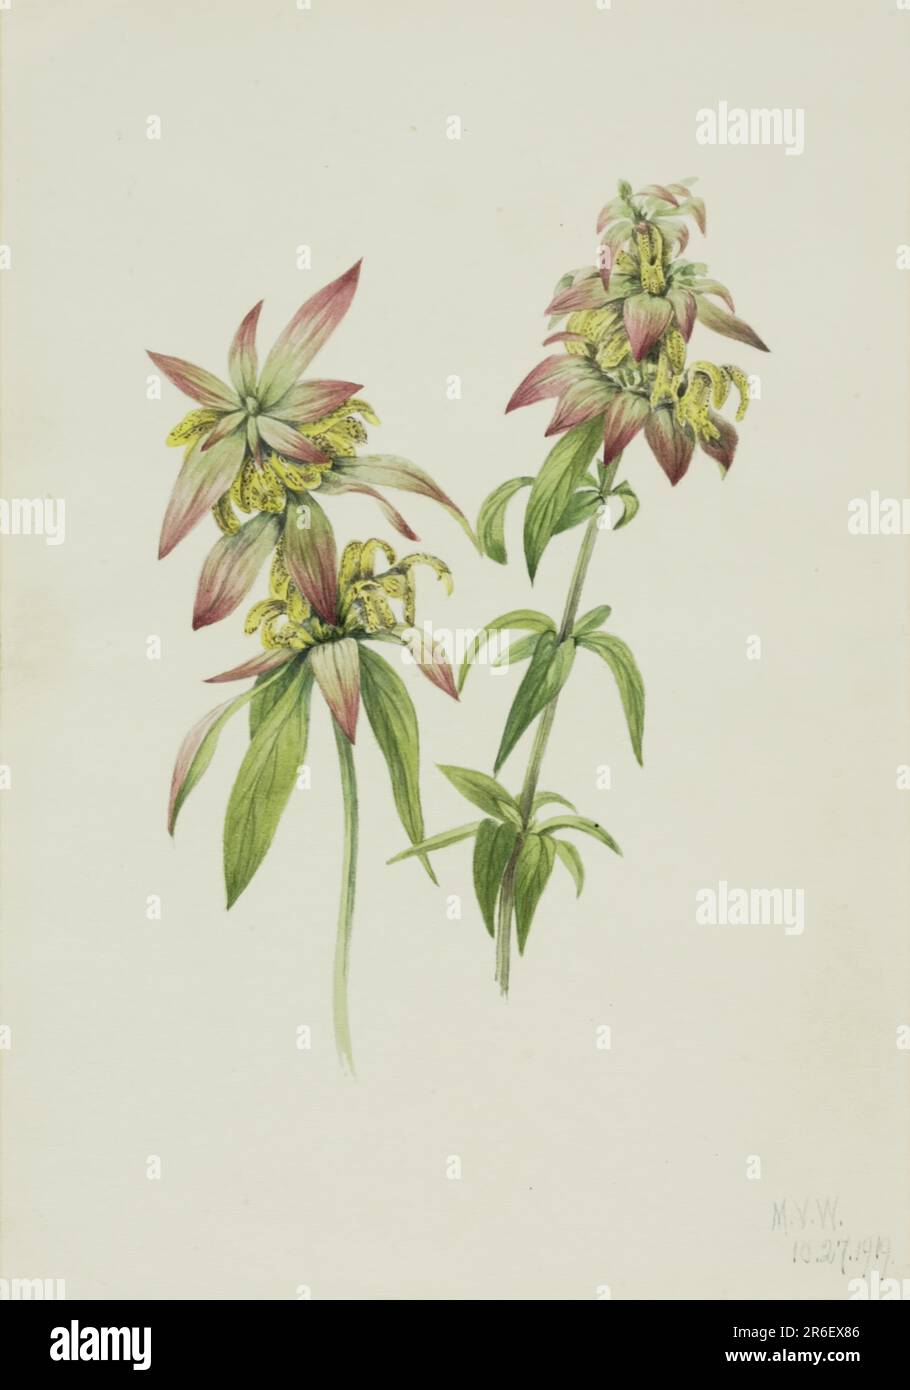 Spotted Bee Balm (Monarda punctata). Date: 1919. Watercolor on paper. Museum: Smithsonian American Art Museum. Stock Photo